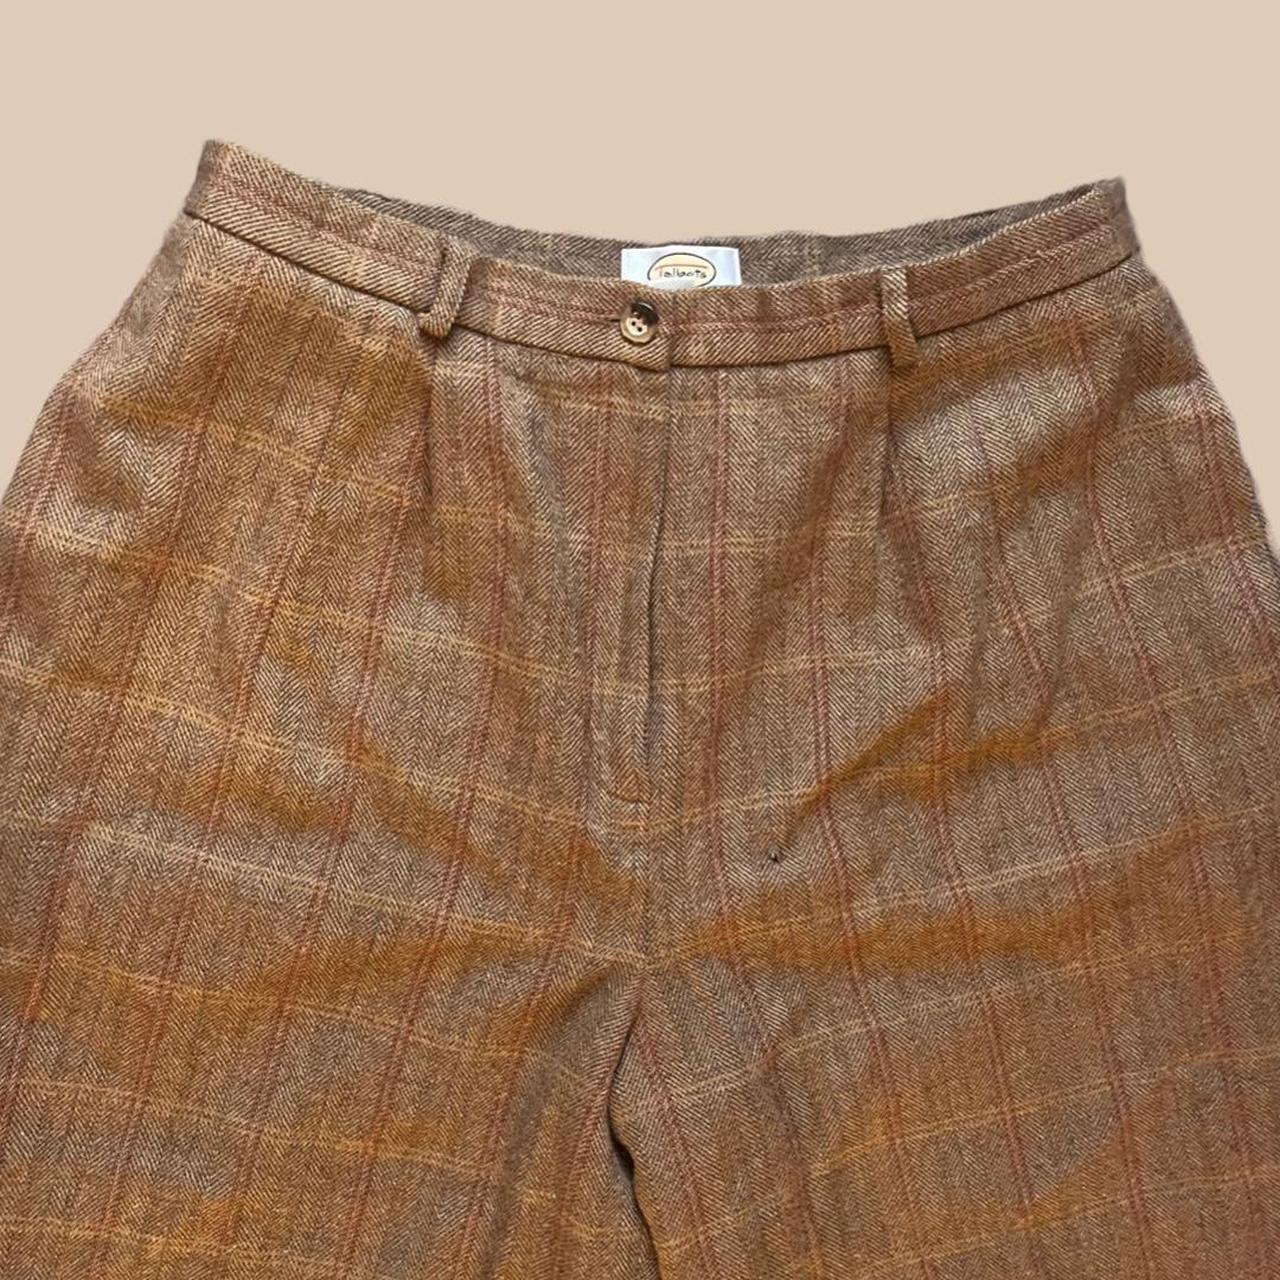 Talbots Women's Brown and Tan Trousers (2)